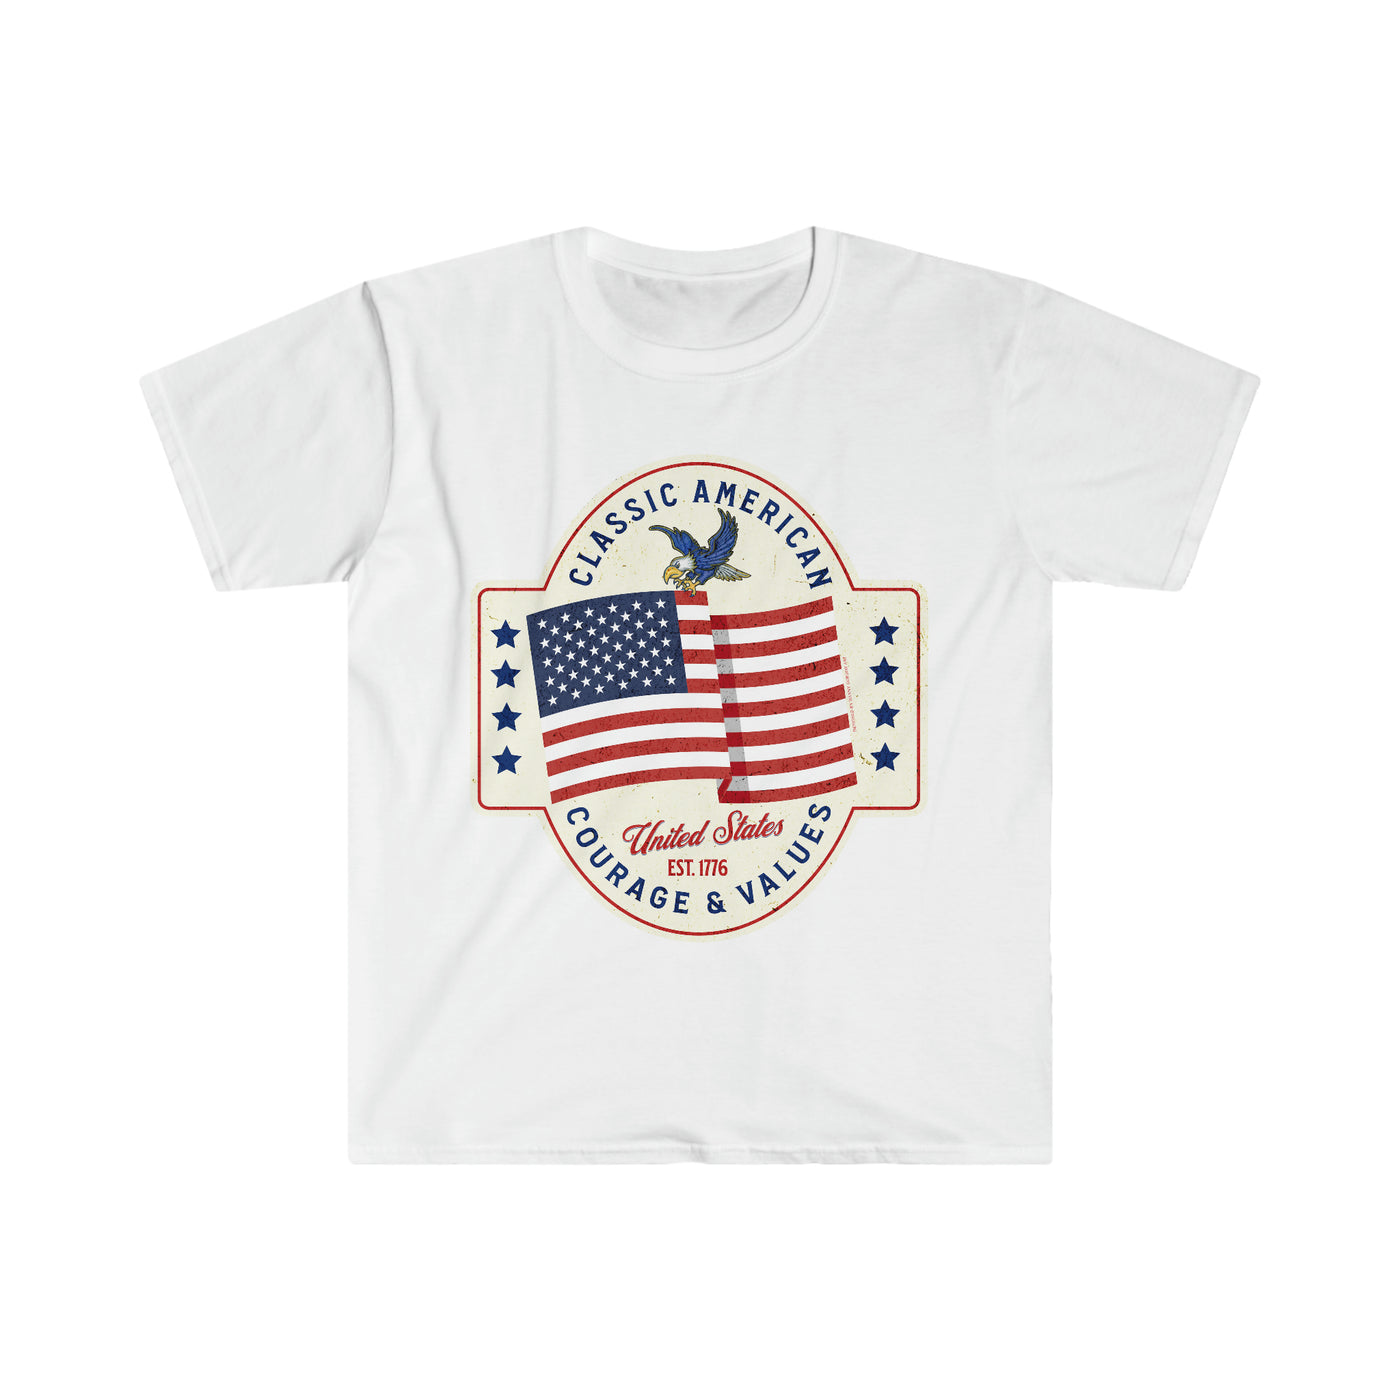 Cute Red white and blue American Unisex T-Shirt